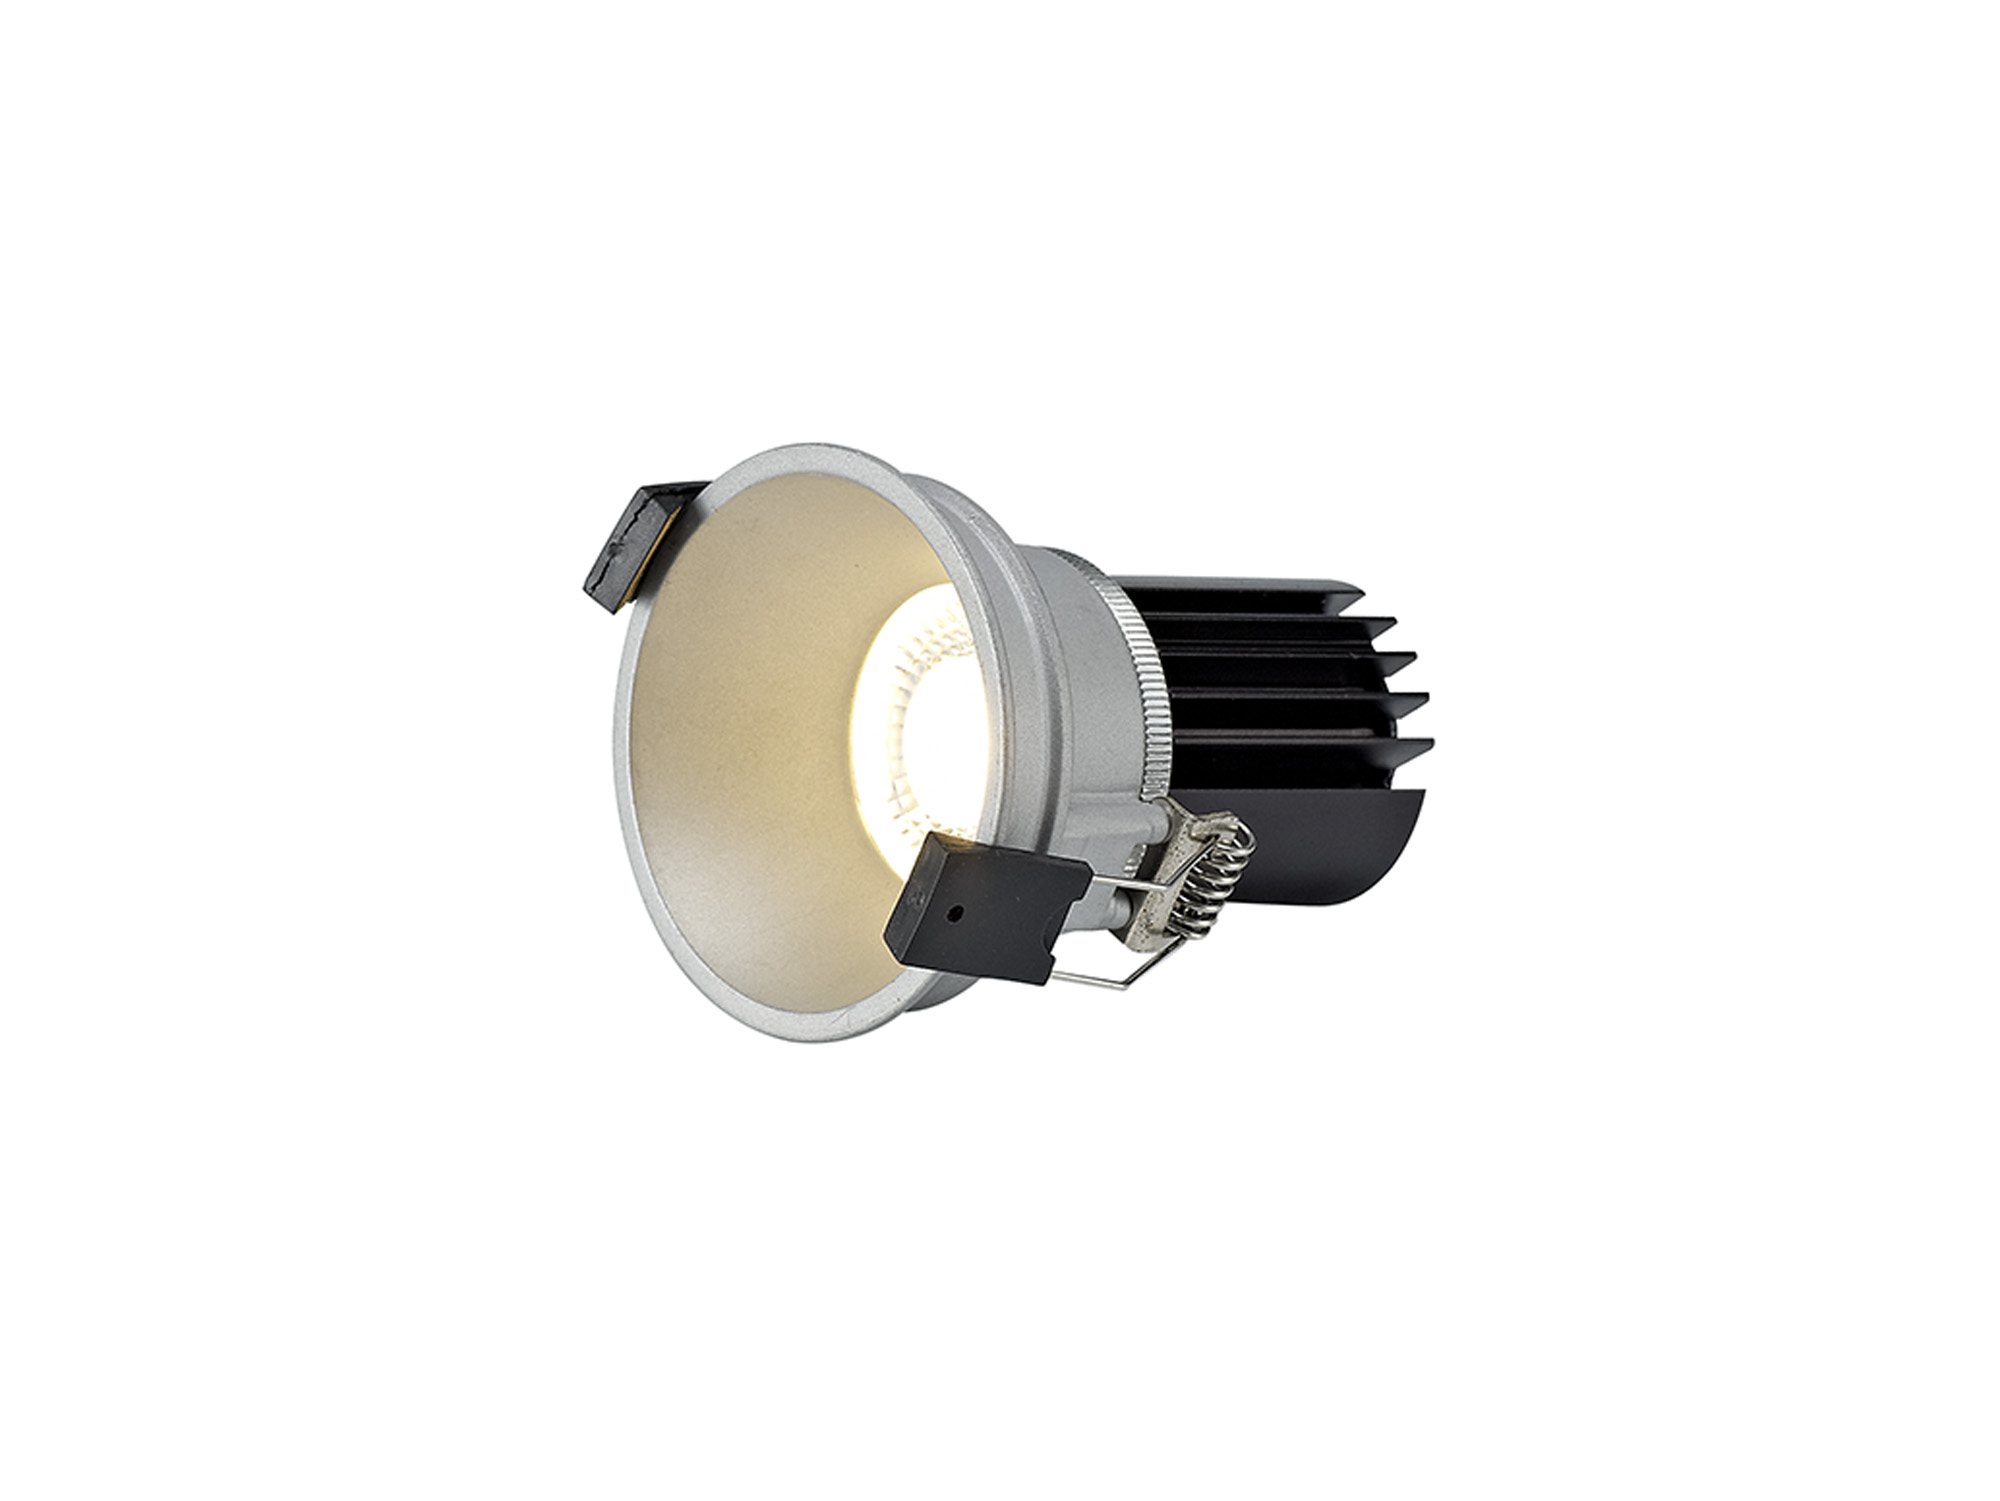 DM201693  Bania 12 Powered by Tridonic  12W 2700K 1200lm 12° CRI>90 LED Engine, 350mA Silver Fixed Recessed Spotlight, IP20